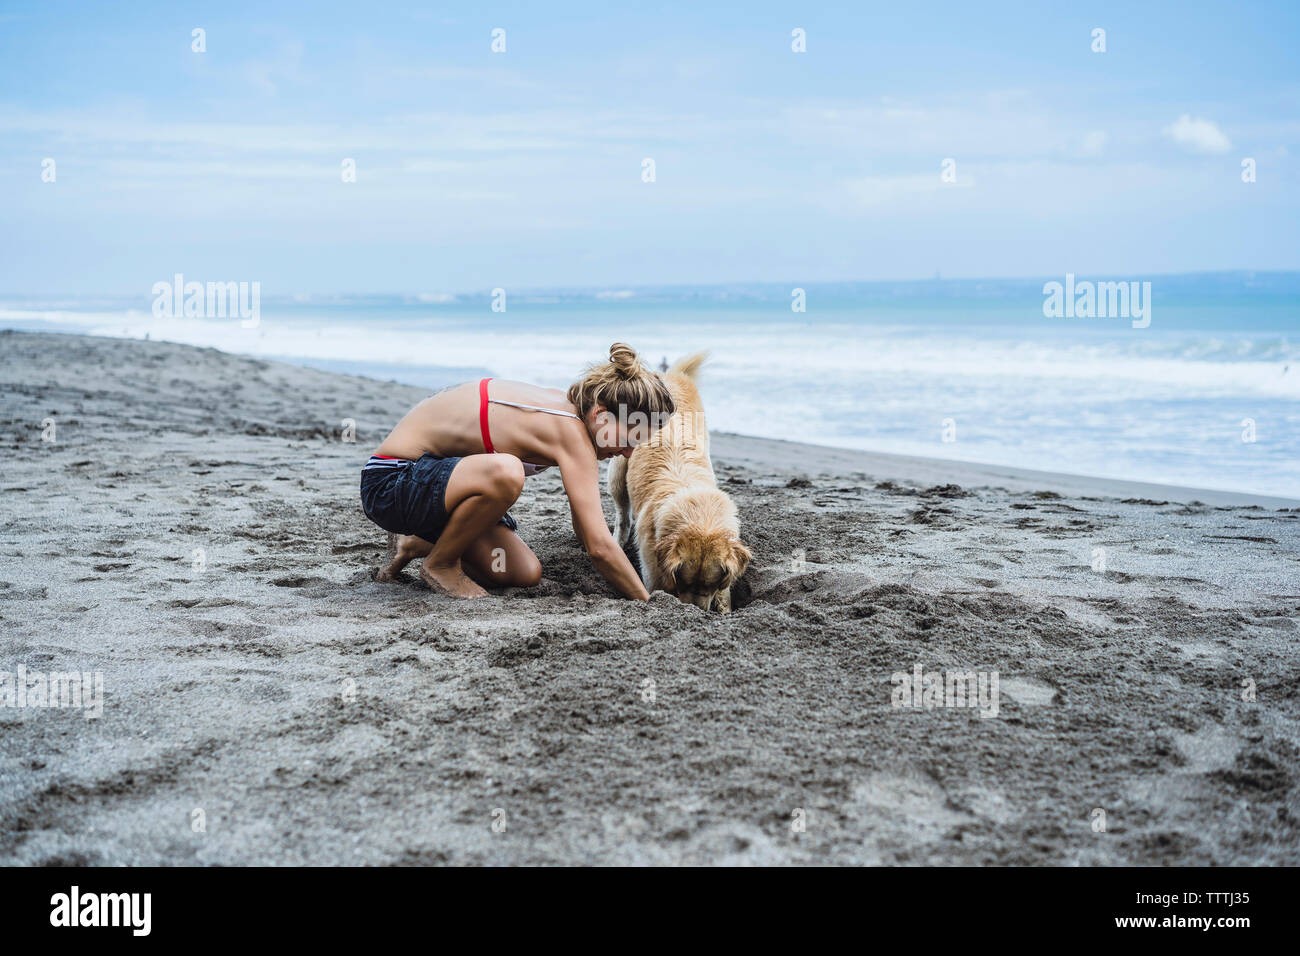 Full length of woman and Labrador Retriever digging on shore at beach Stock Photo